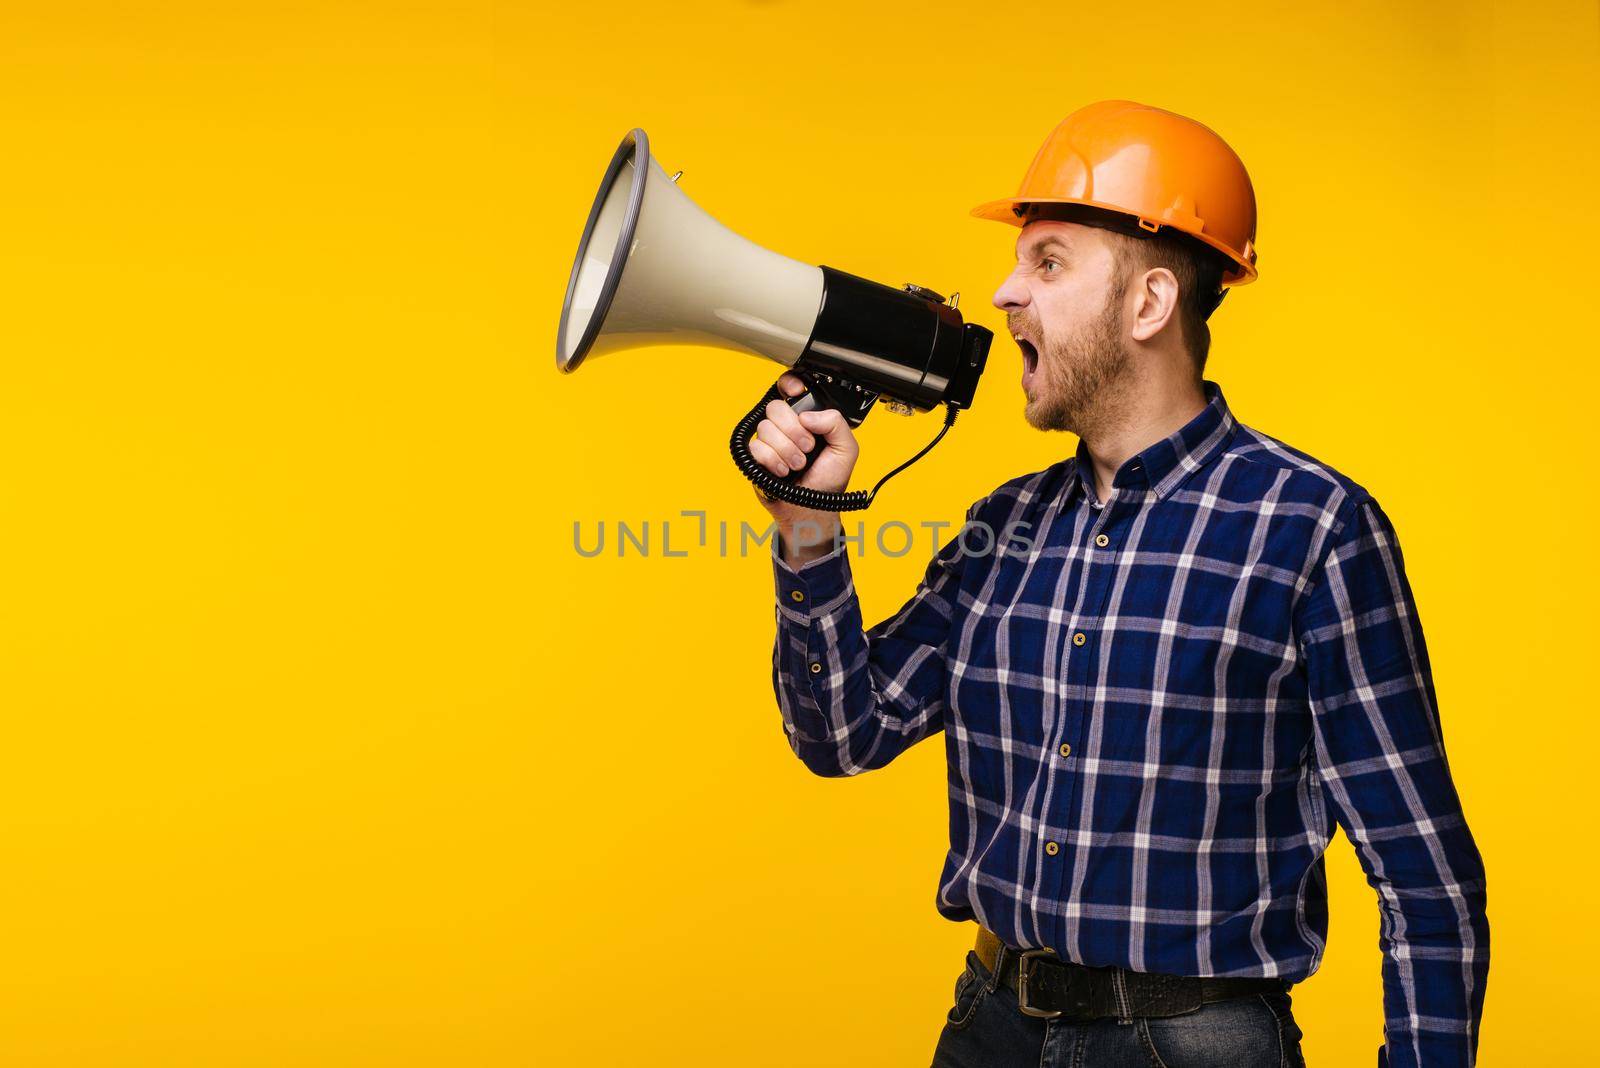 Angry worker man in orange helmet with a megaphone on yellow background - Image